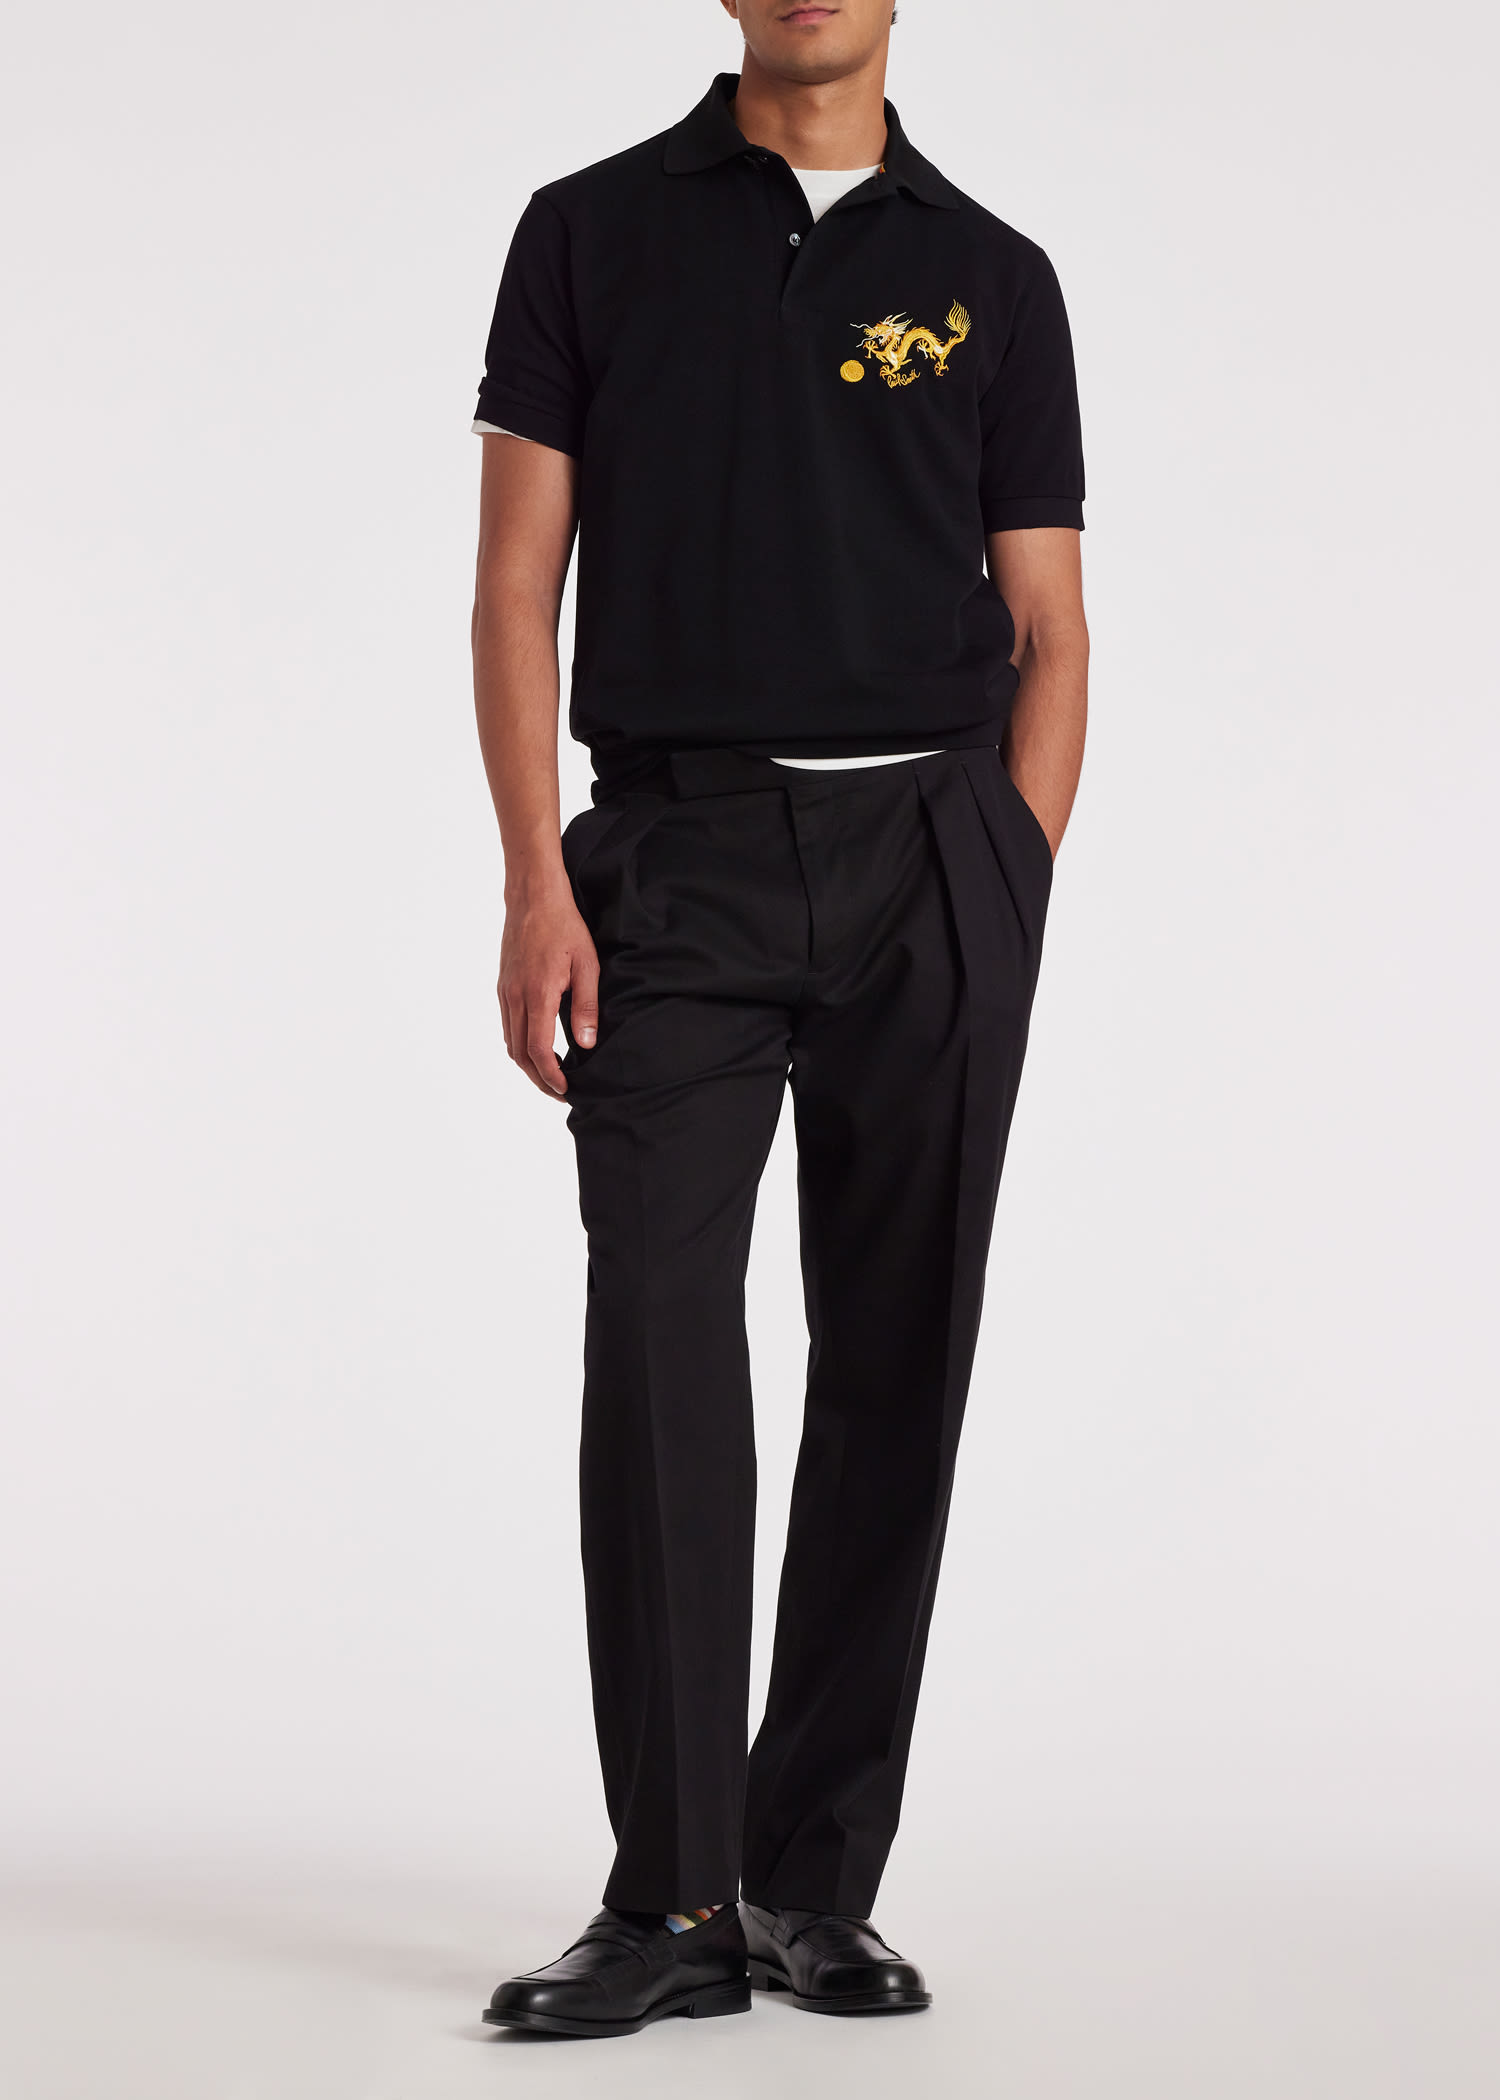 Black 'Year Of The Dragon' Embroidered Polo Shirt